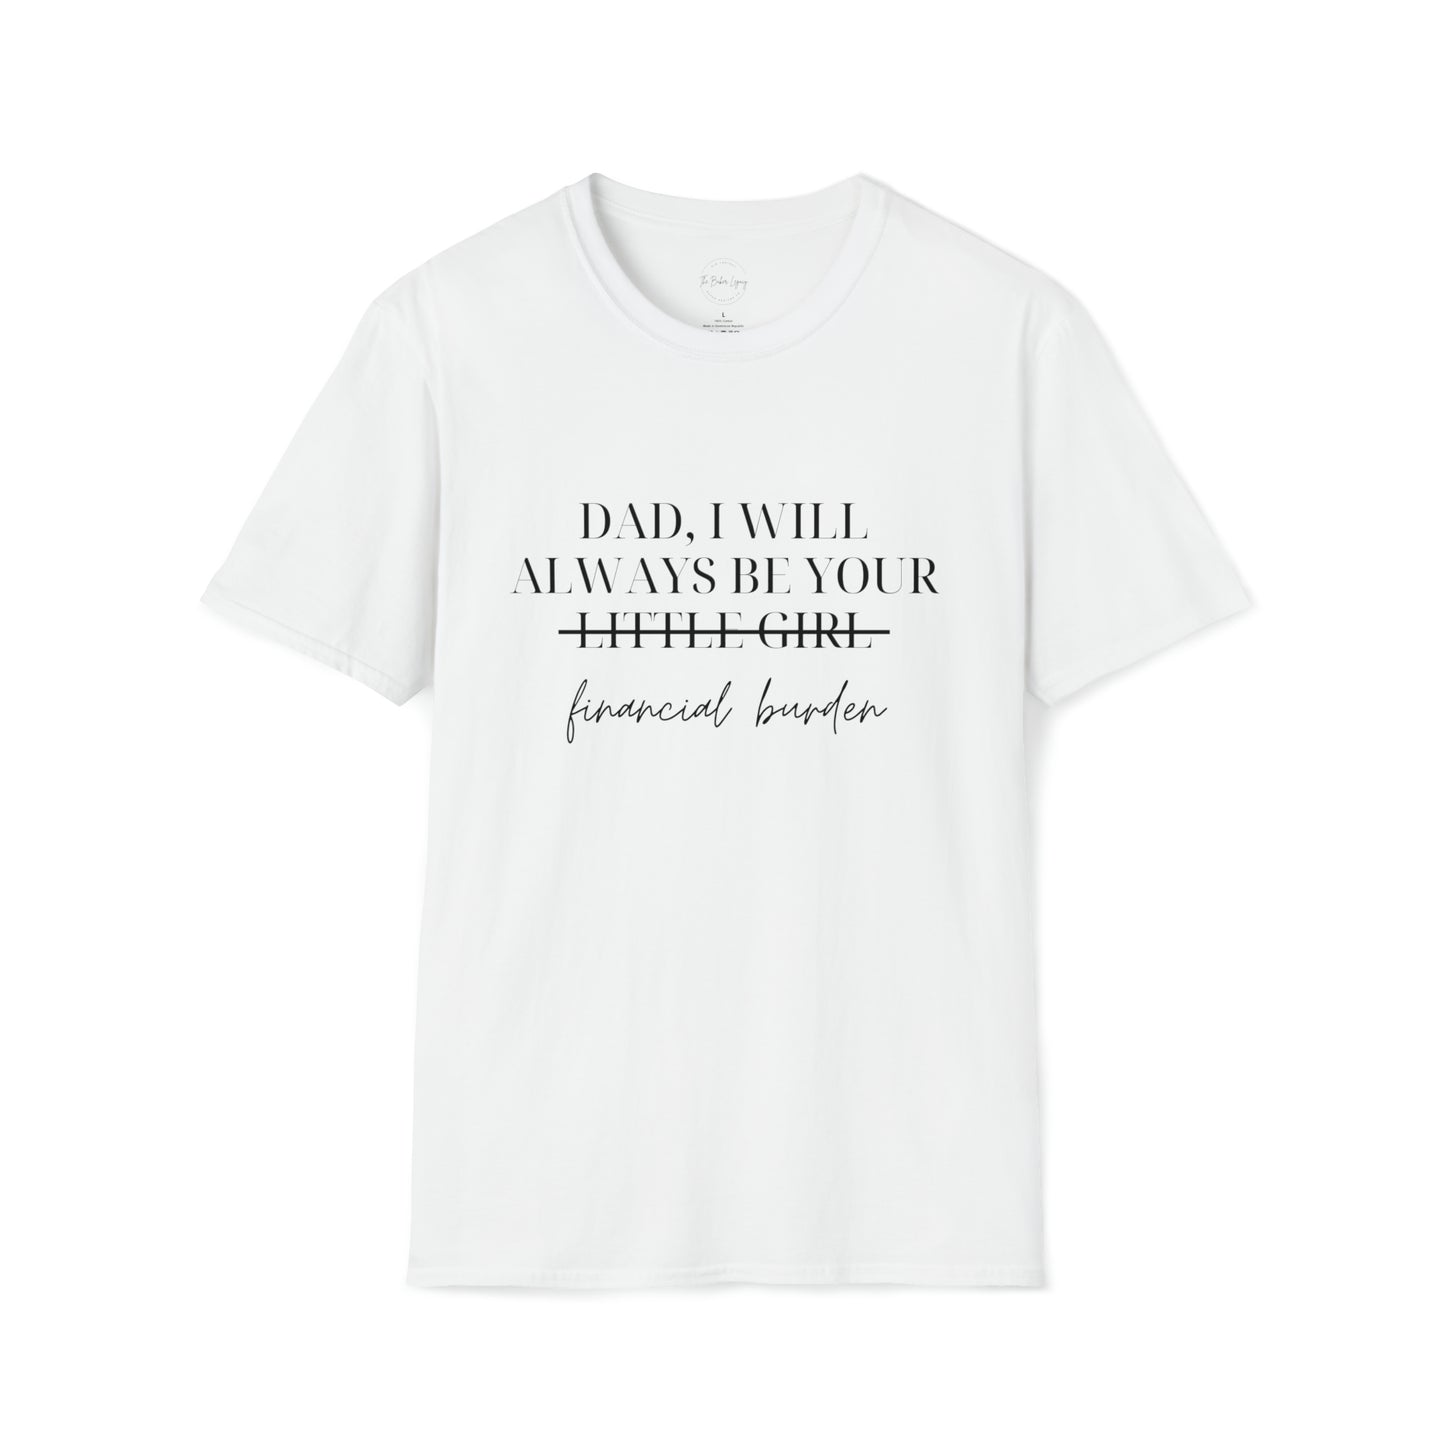 Dad, I Will Always Be Your Financial Burden Unisex Softstyle T-Shirt